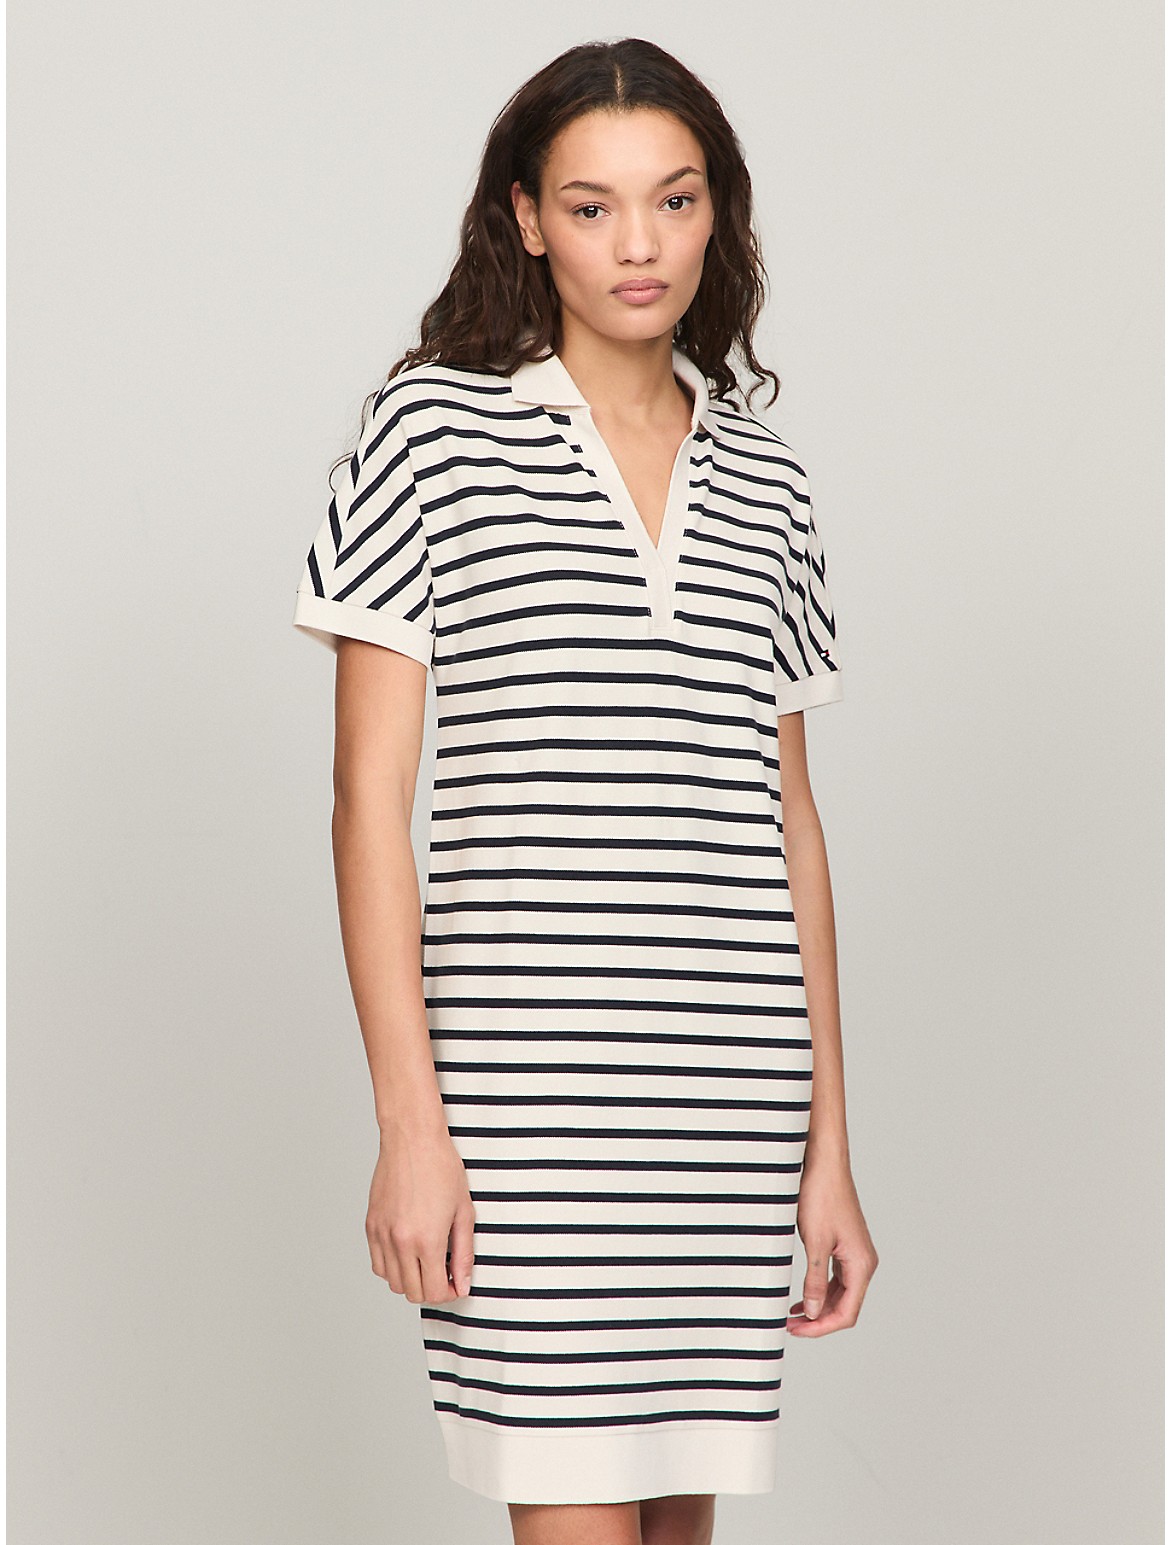 Tommy Hilfiger Women's Relaxed Fit Stripe Polo Dress